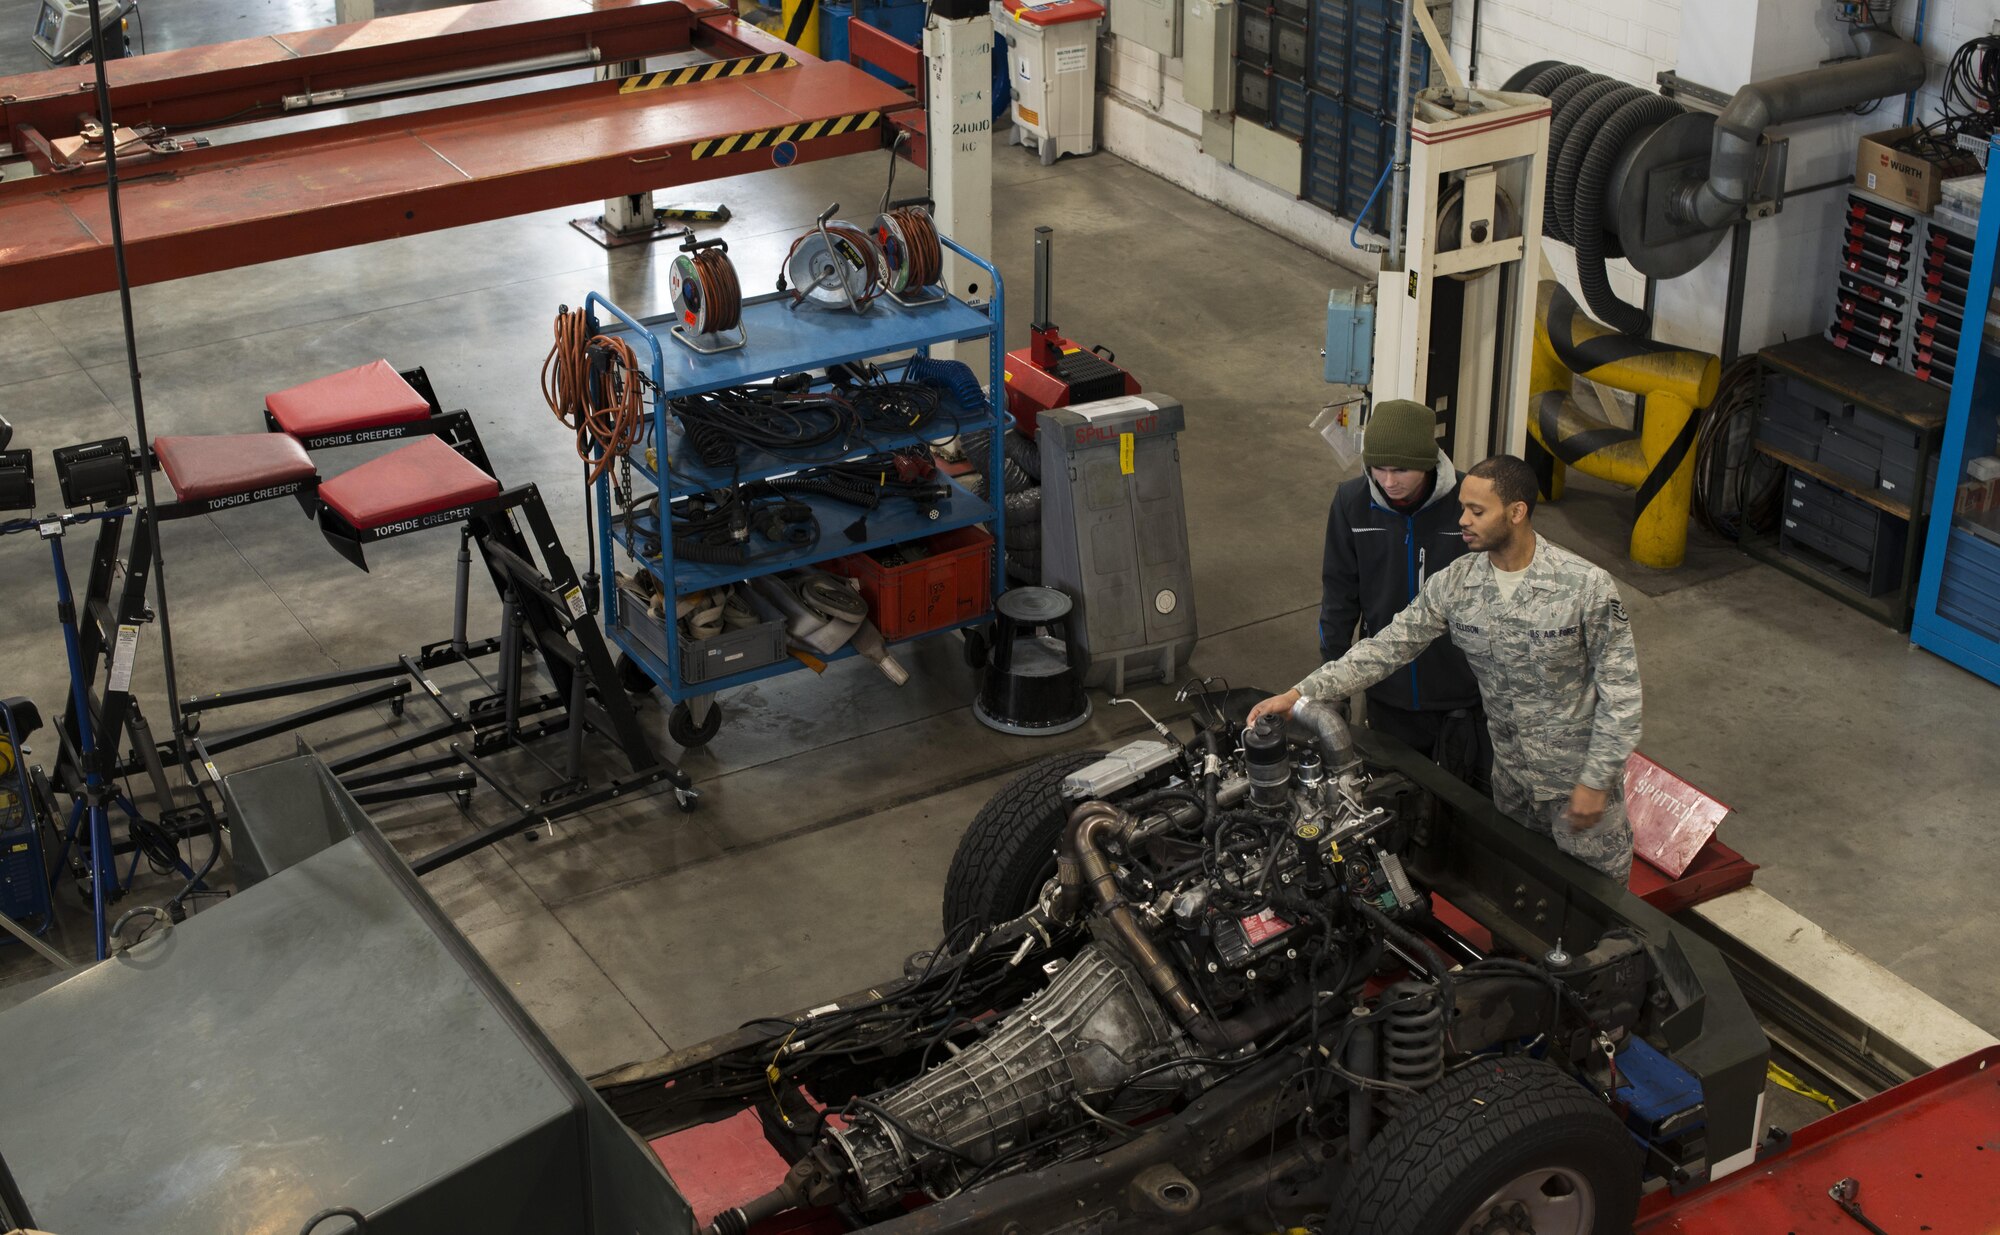 Staff Sgt. Travias Ellison, 86th Vehicle Readiness Squadron mission generation technician, teaches Hendrik Ecker, 86th VRS vehicle mechanic technician, about an international 6.0 liter engine at Ramstein Air Base, Germany, Nov. 14, 2016. Ecker partnered with the 86th VRS through Ramstein’s Local National Apprenticeship program, and will retain his position from three and-a-half to four years. Once the apprenticeship is complete, Ecker will have the opportunity to transfer to a permanent position in the area in vehicle maintenance. (U.S. Air Force photo by Senior Airman Tryphena Mayhugh)